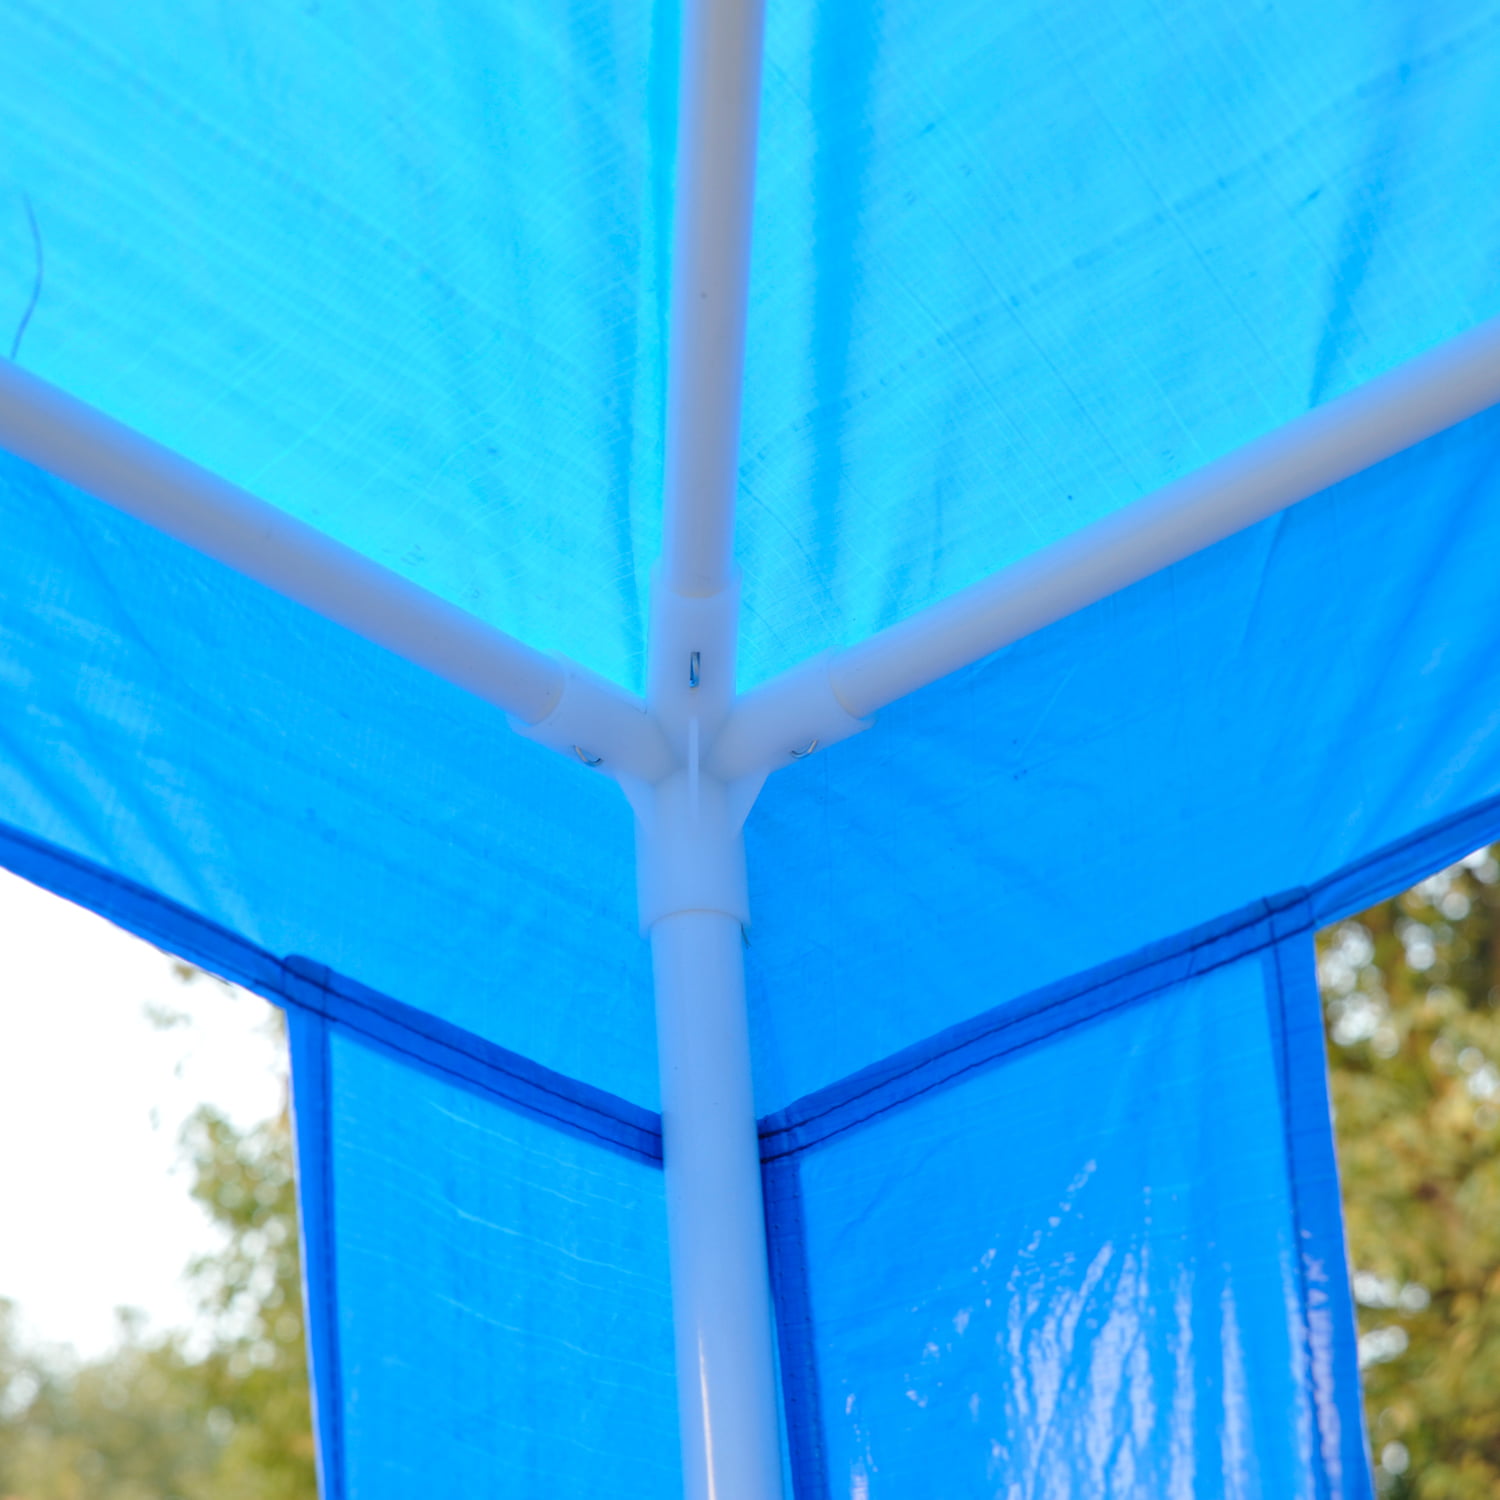 Blue Outsunny Outdoor Gazebo Canopy Party Tent 9x9ft Sunshade